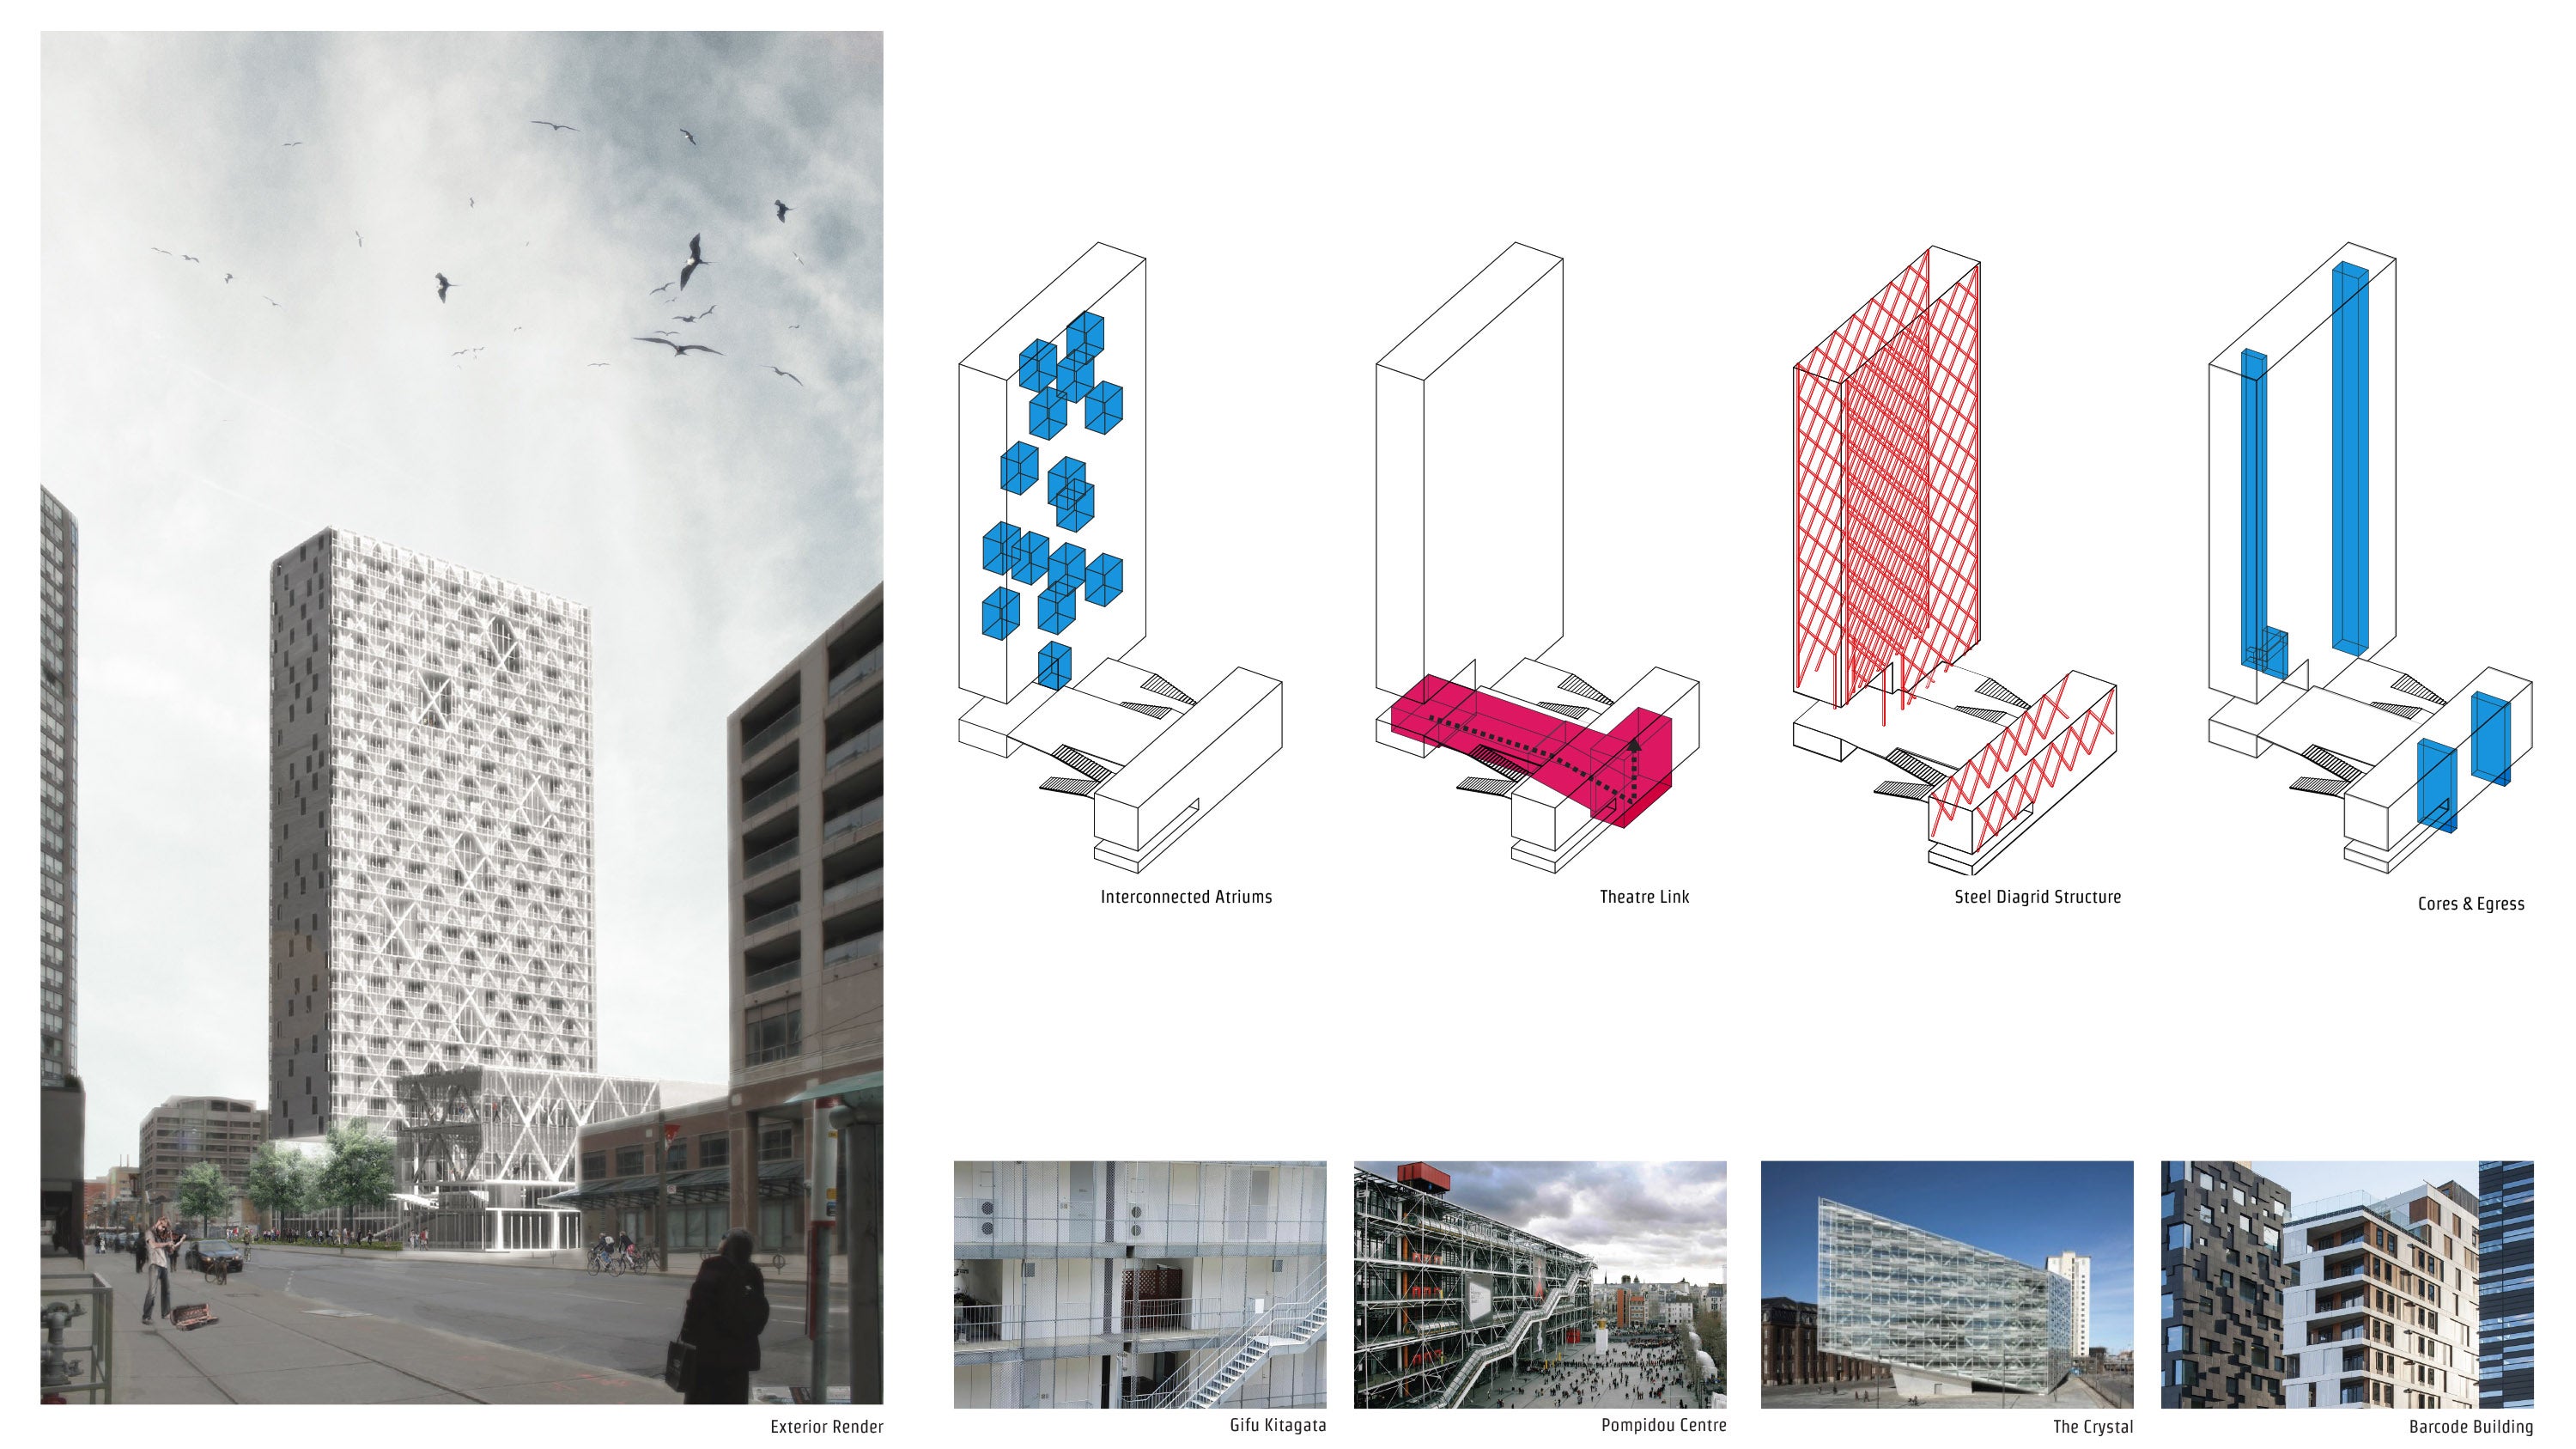 A presentation panel showing a program organization diagram, several photos of inspirations, and a street level render.